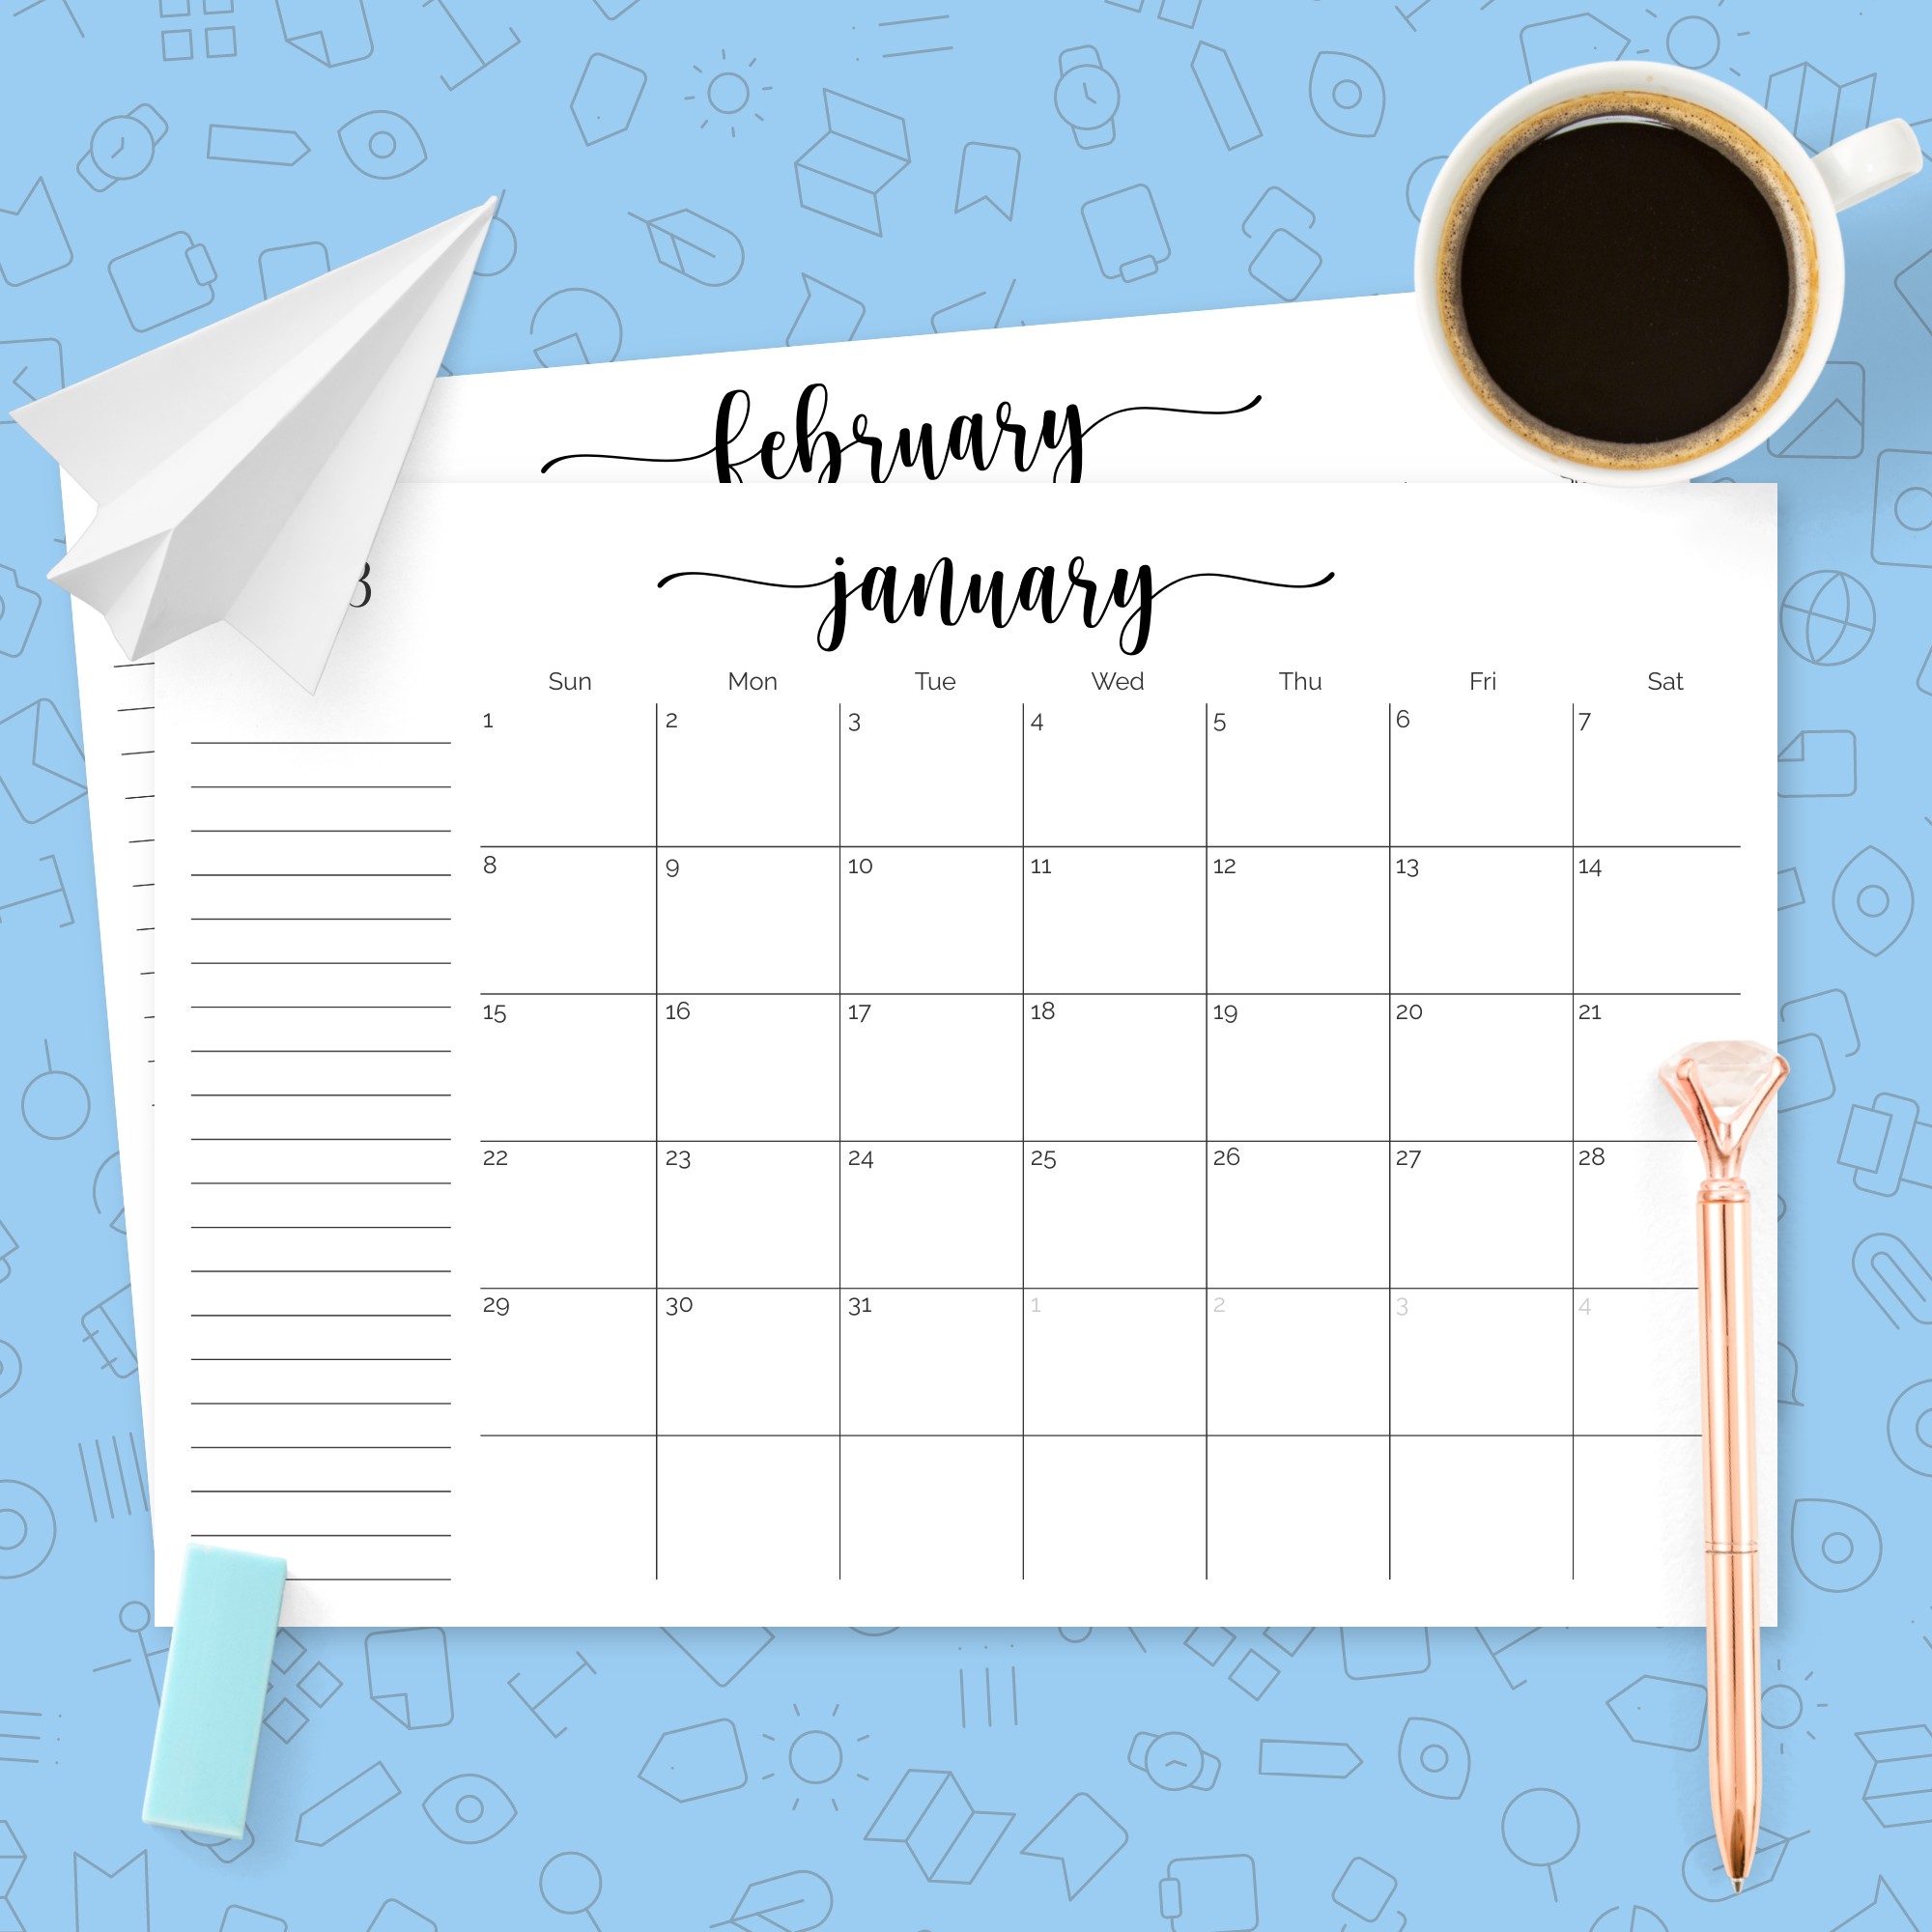 Monthly Calendar with Notes Section Template - Printable PDF